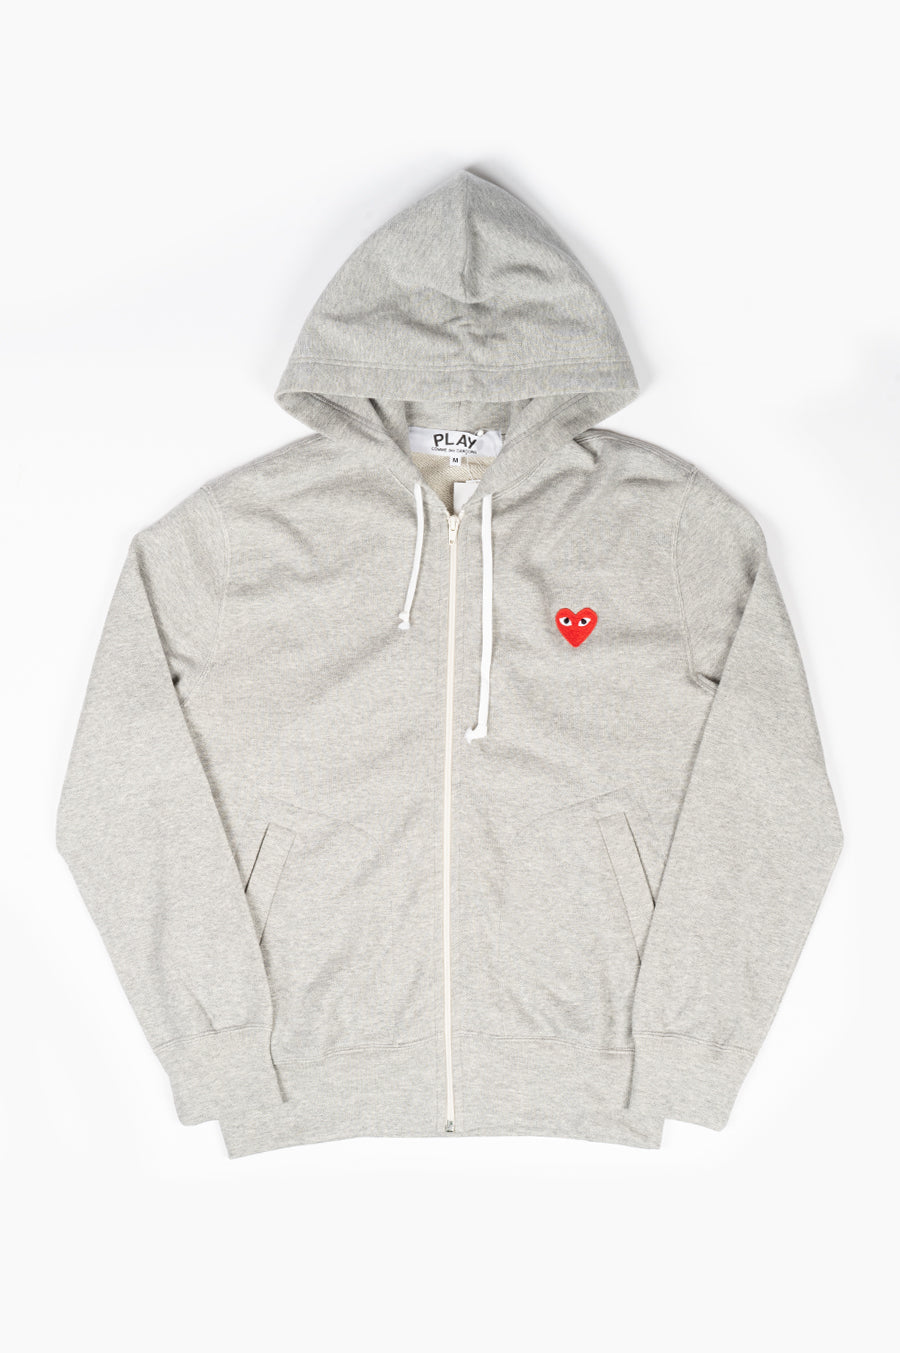 COMME DES GARCONS PLAY HOODIE JACKET LIGHT HEATHER GREY – BLENDS